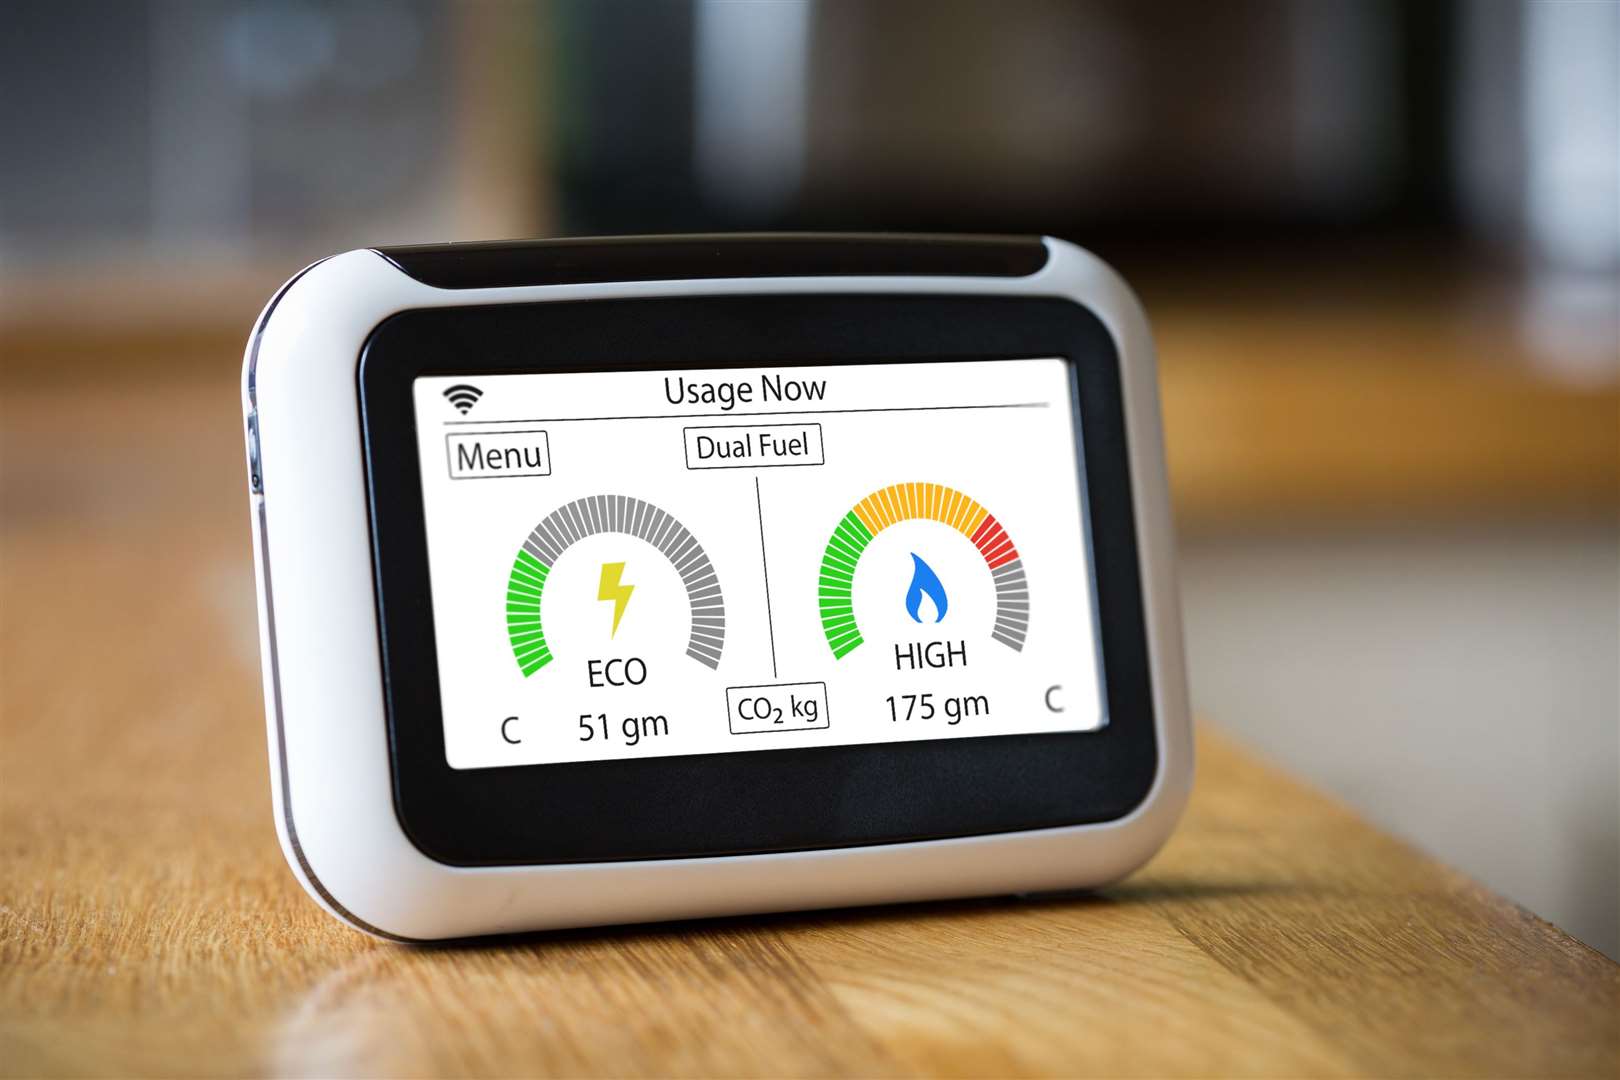 Smart meters can help households and businesses monitor their energy consumption.